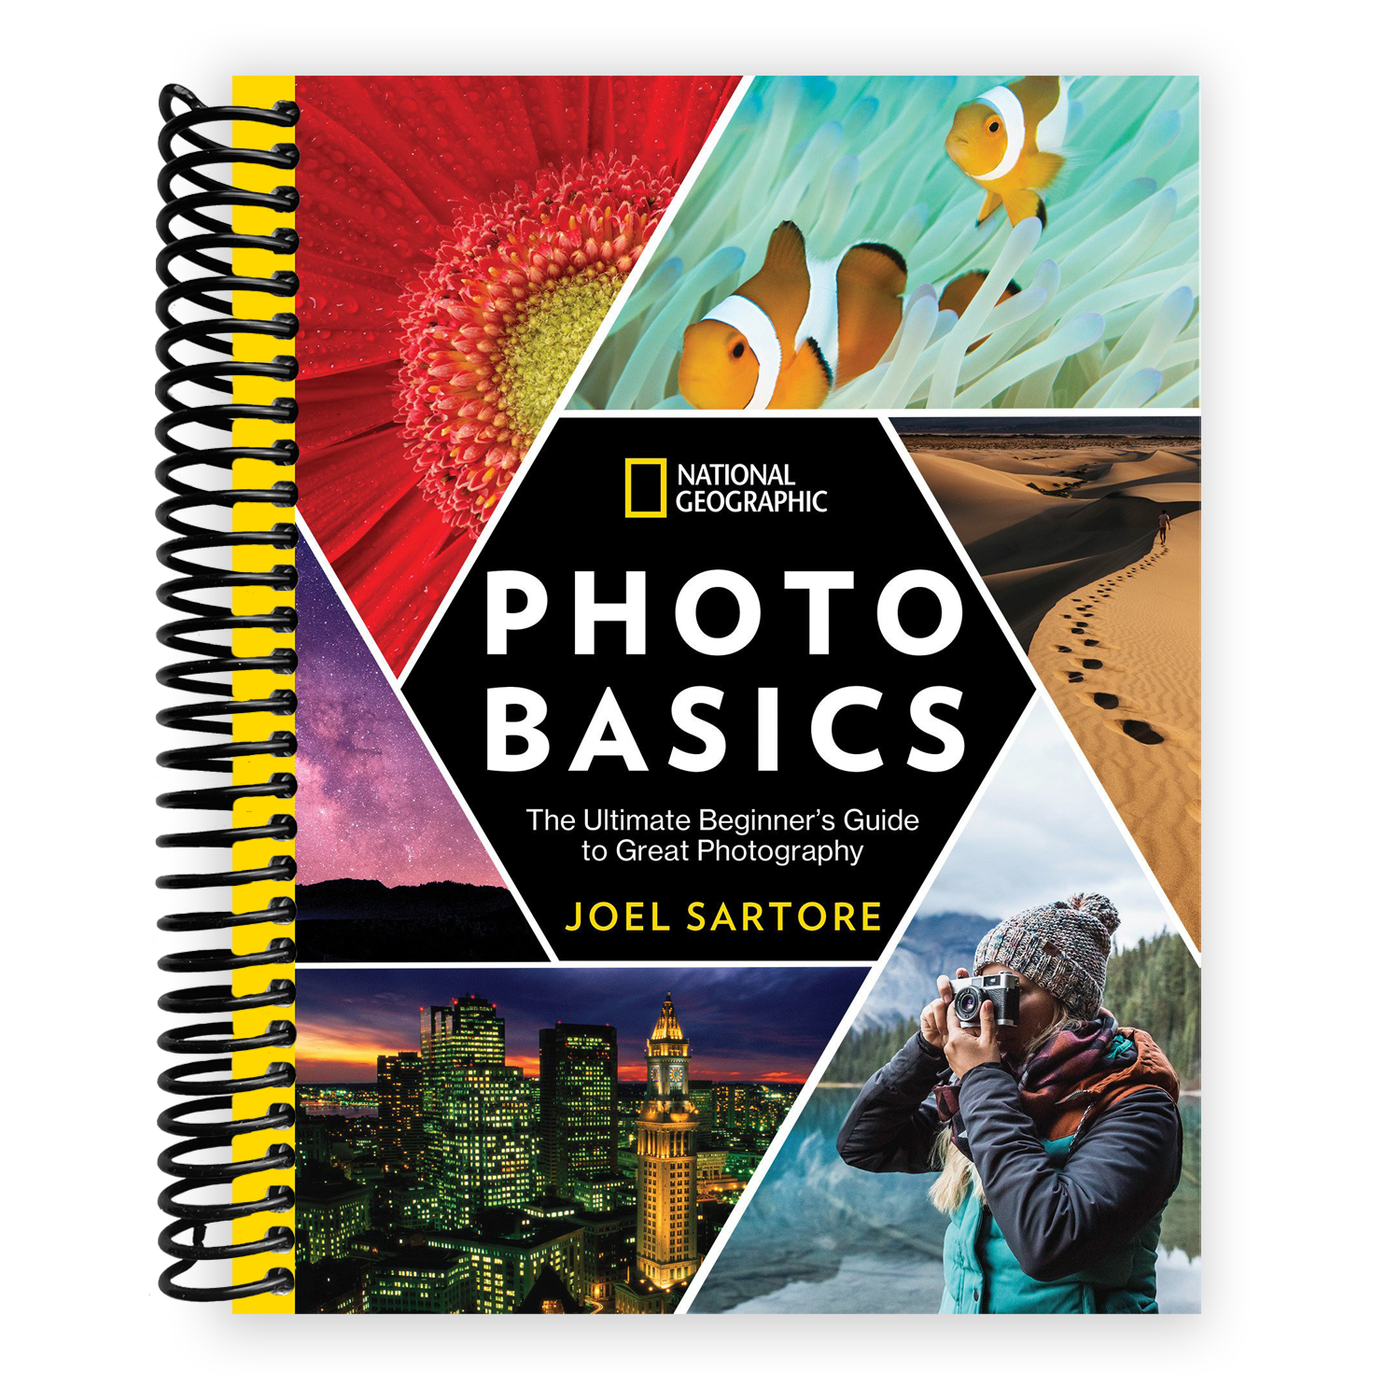 National Geographic Photo Basics: The Ultimate Beginner's Guide to Great Photography (Spiral Bound)